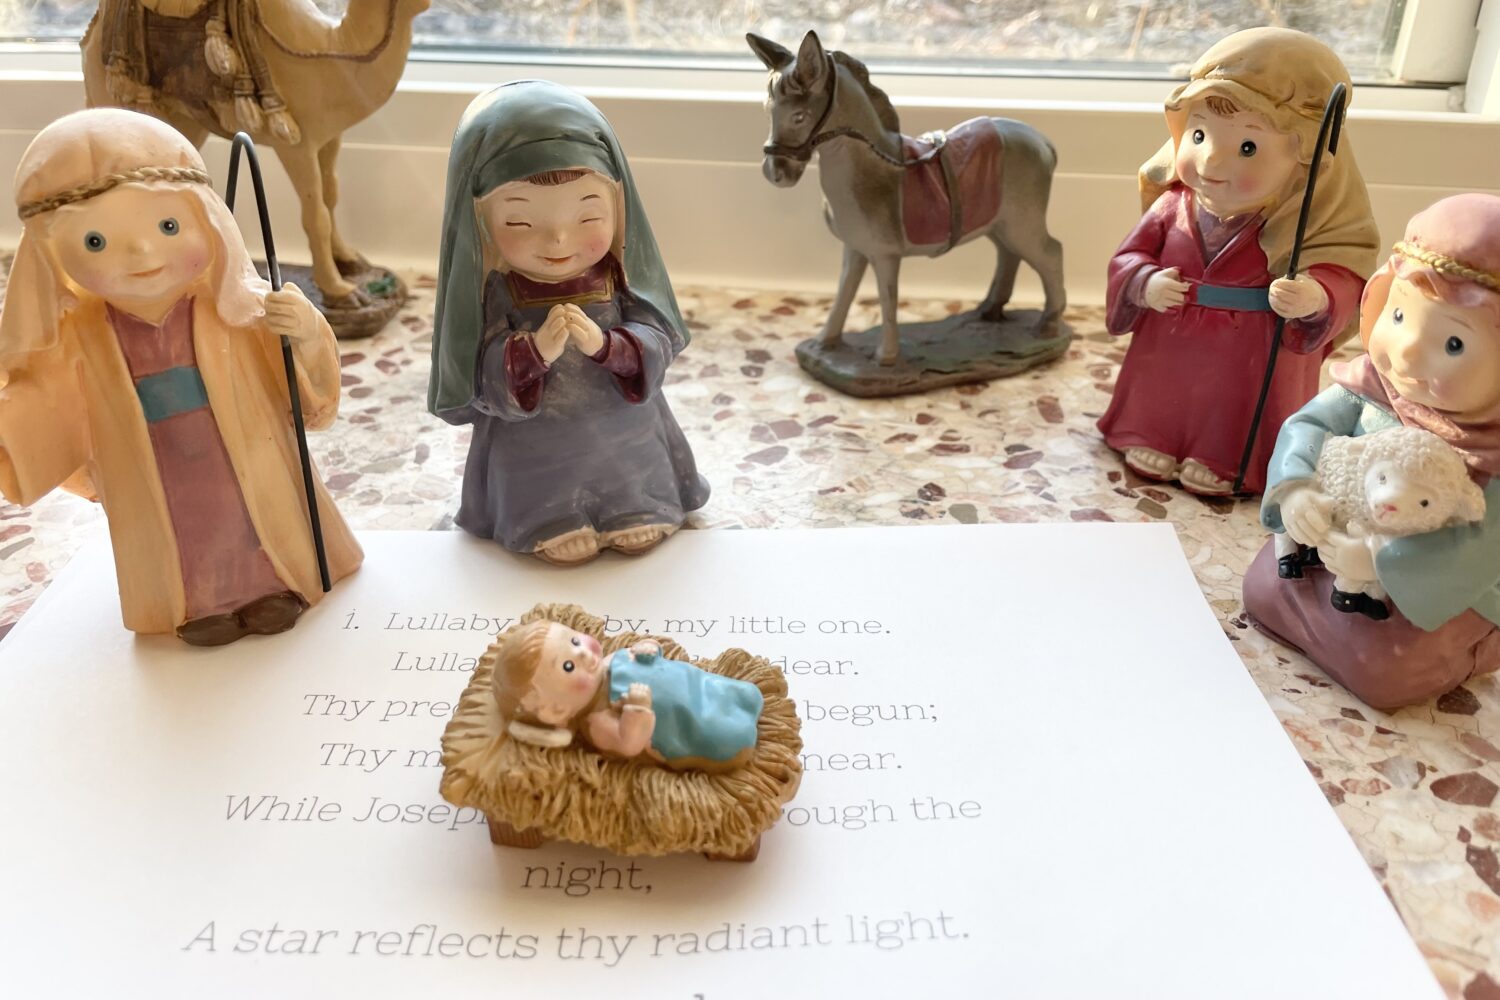 Mary's Lullaby Nativity Scene Activity Singing time ideas for Primary Music Leaders IMG 7626